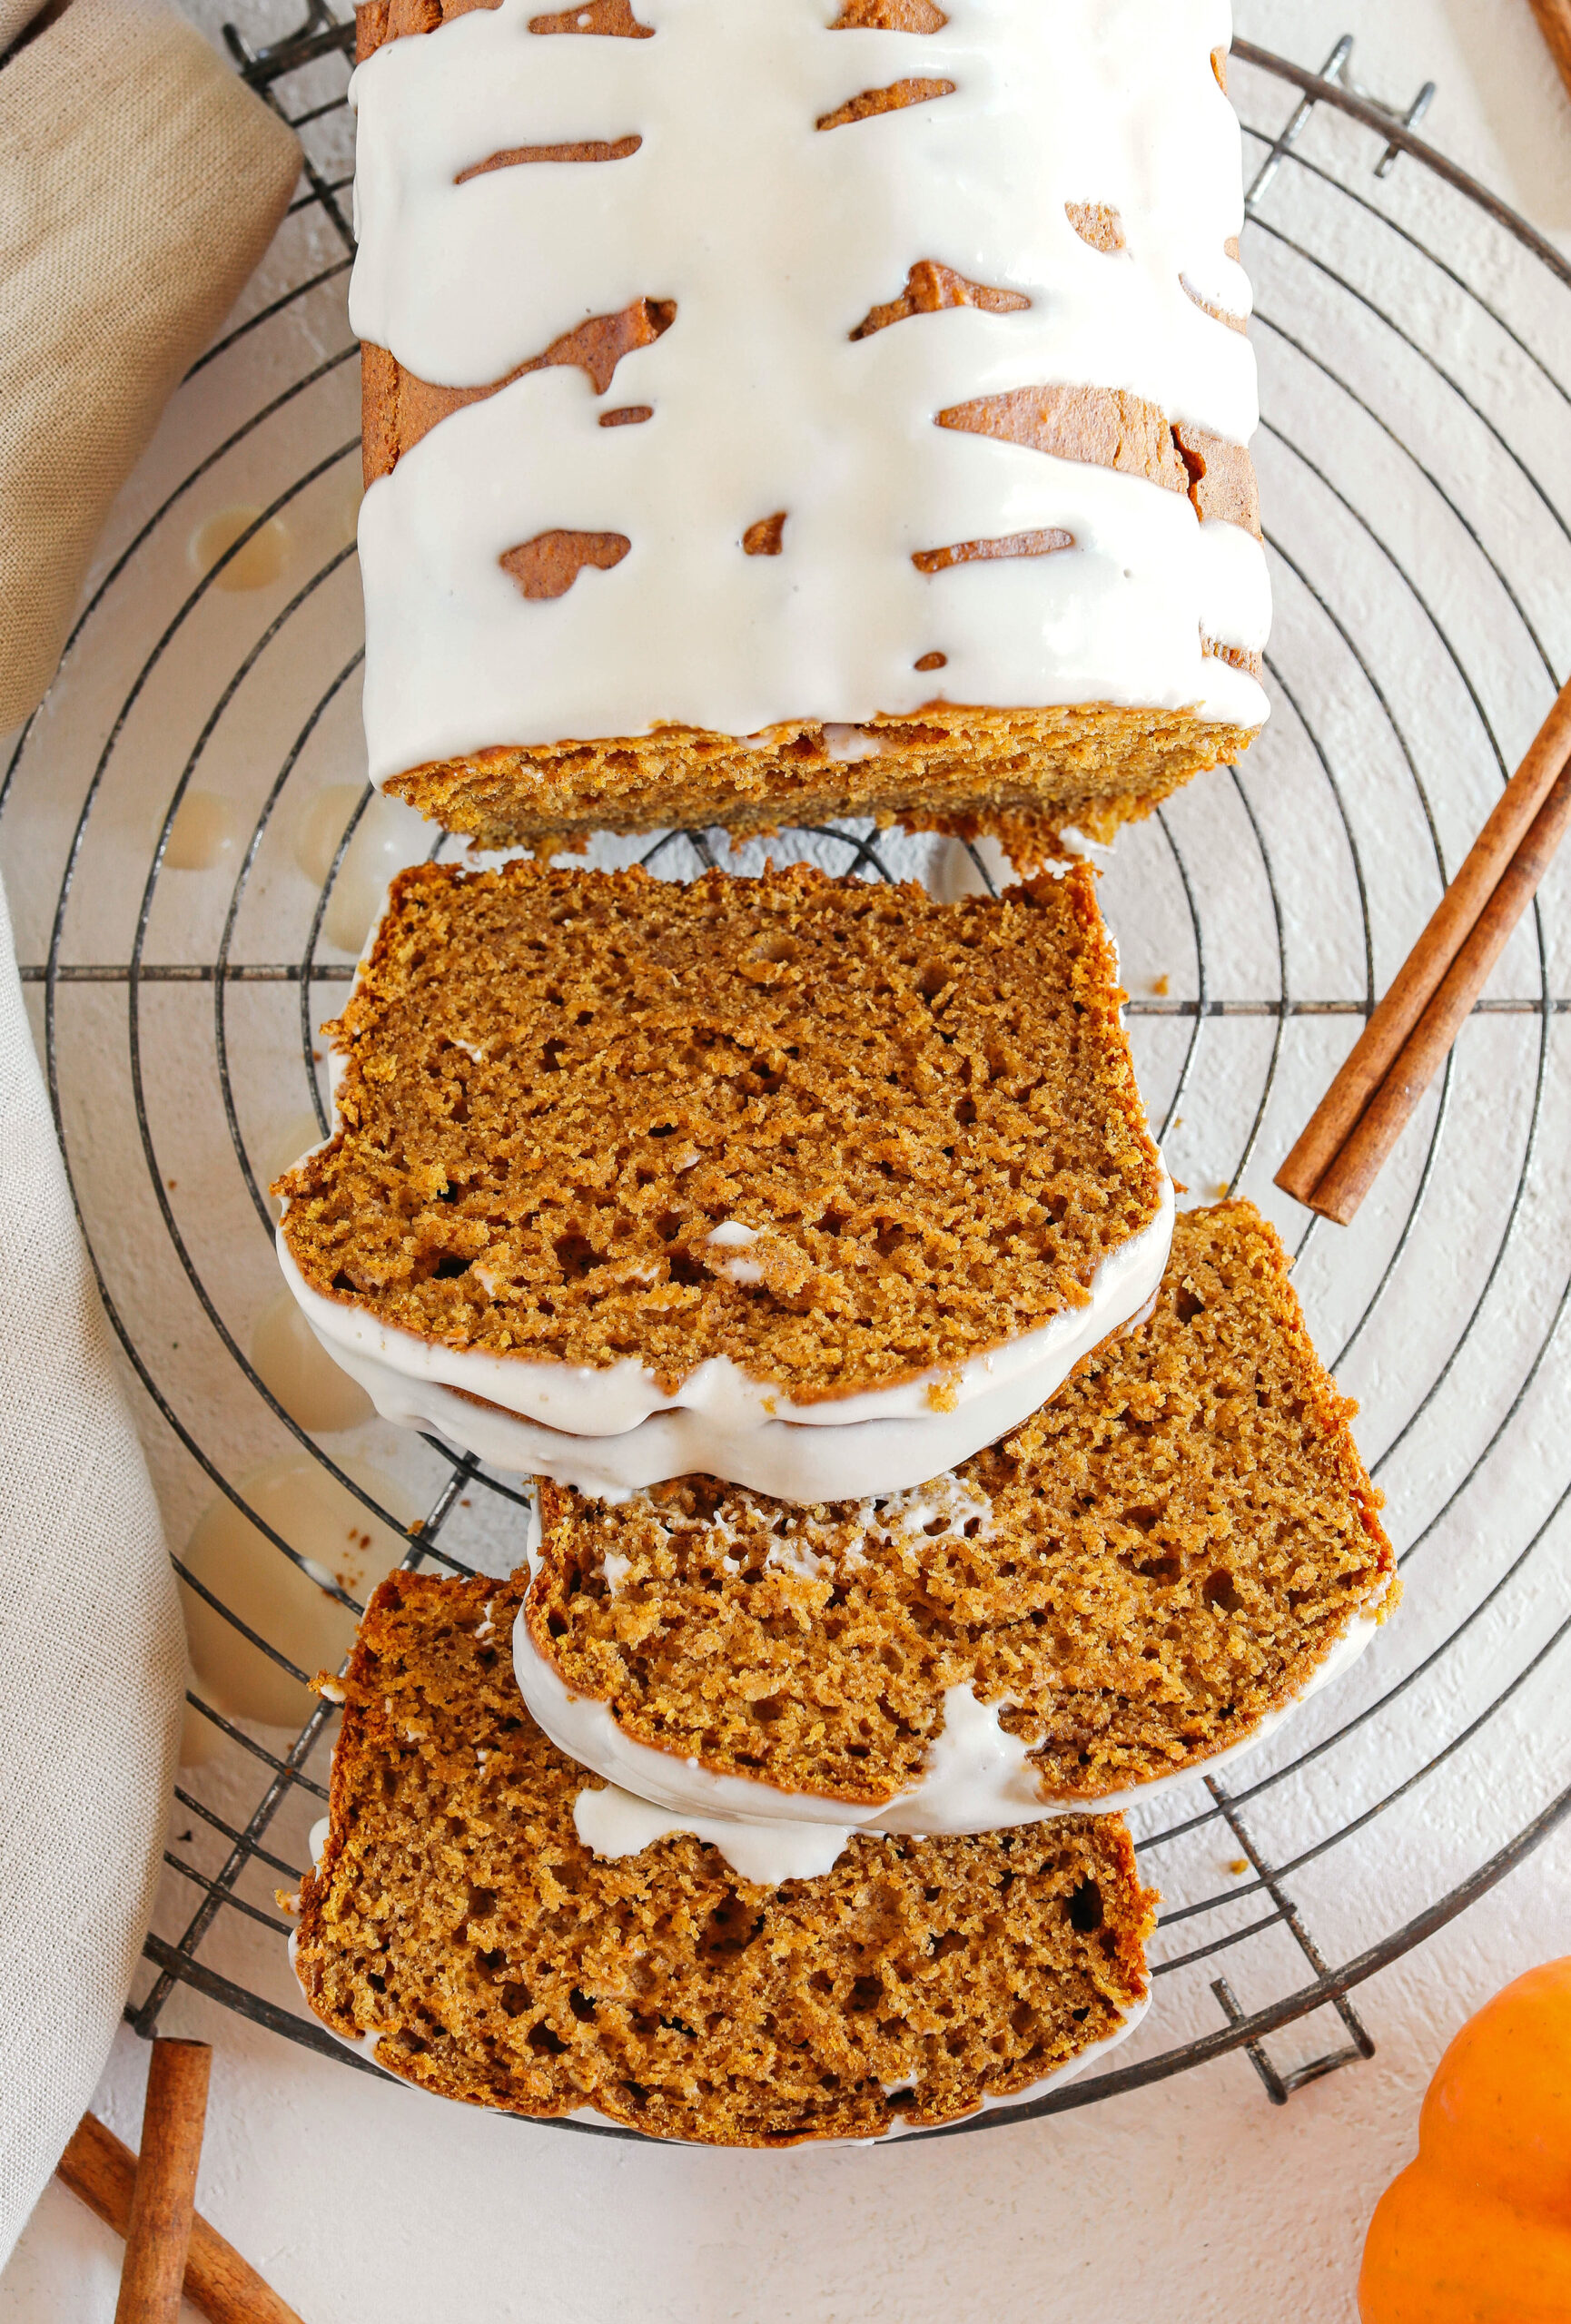 The BEST Healthy Pumpkin Bread recipe that is moist, loaded with pumpkin flavor and made without any butter or refined sugar!  Topped with a delicious maple cream cheese glaze for the perfect fall treat this season!